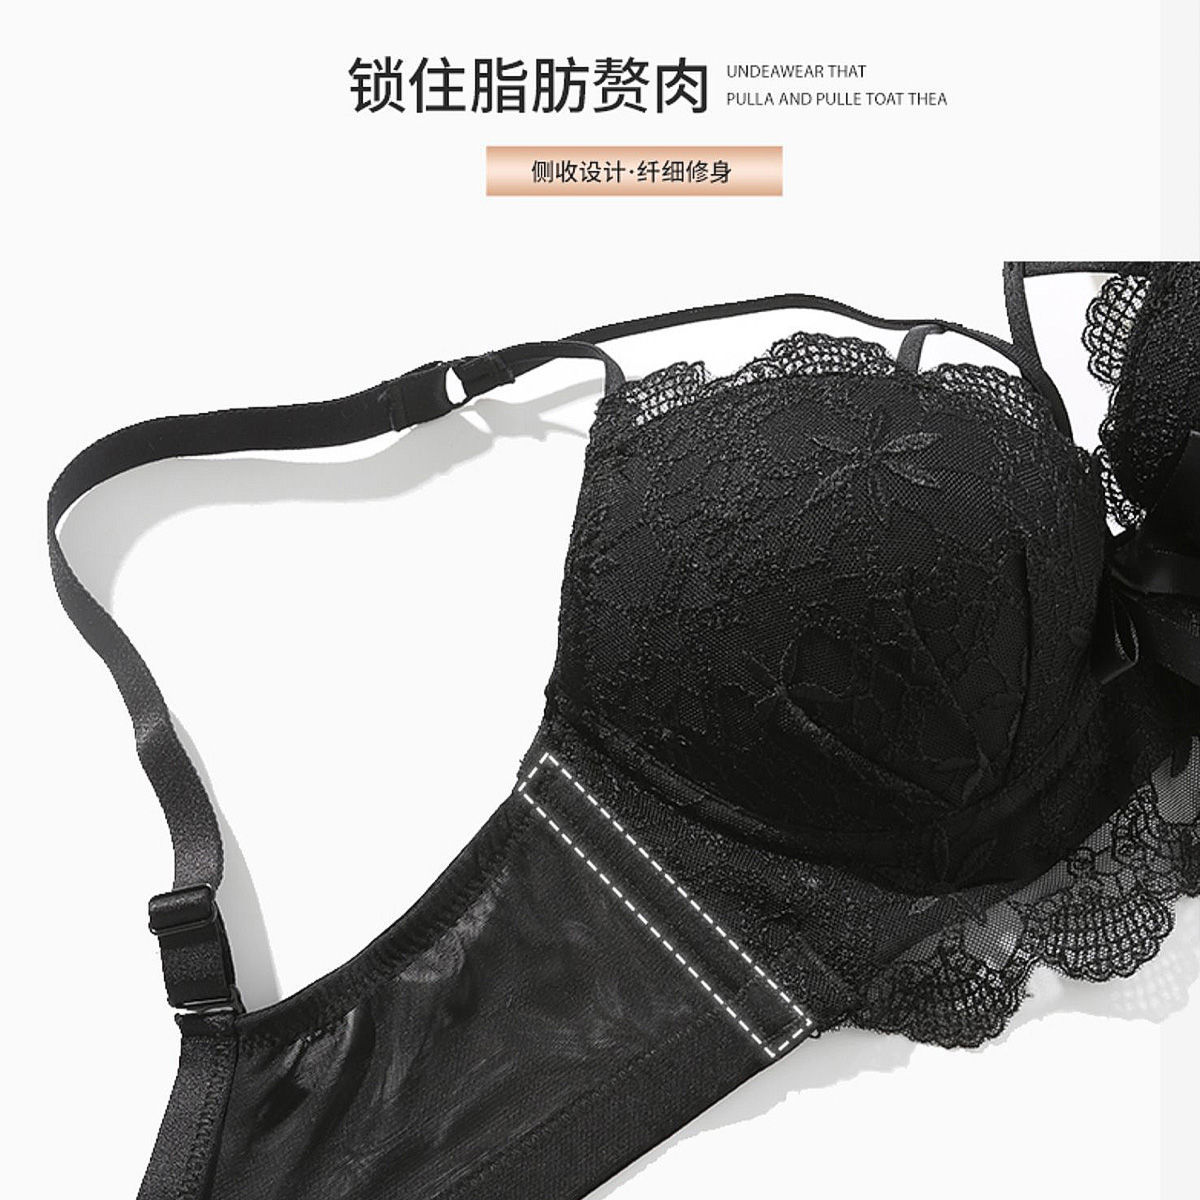 Aishuk abstinence underwear hot girl female sexy small chest gather bra lace mesh breathable bra anti-sagging